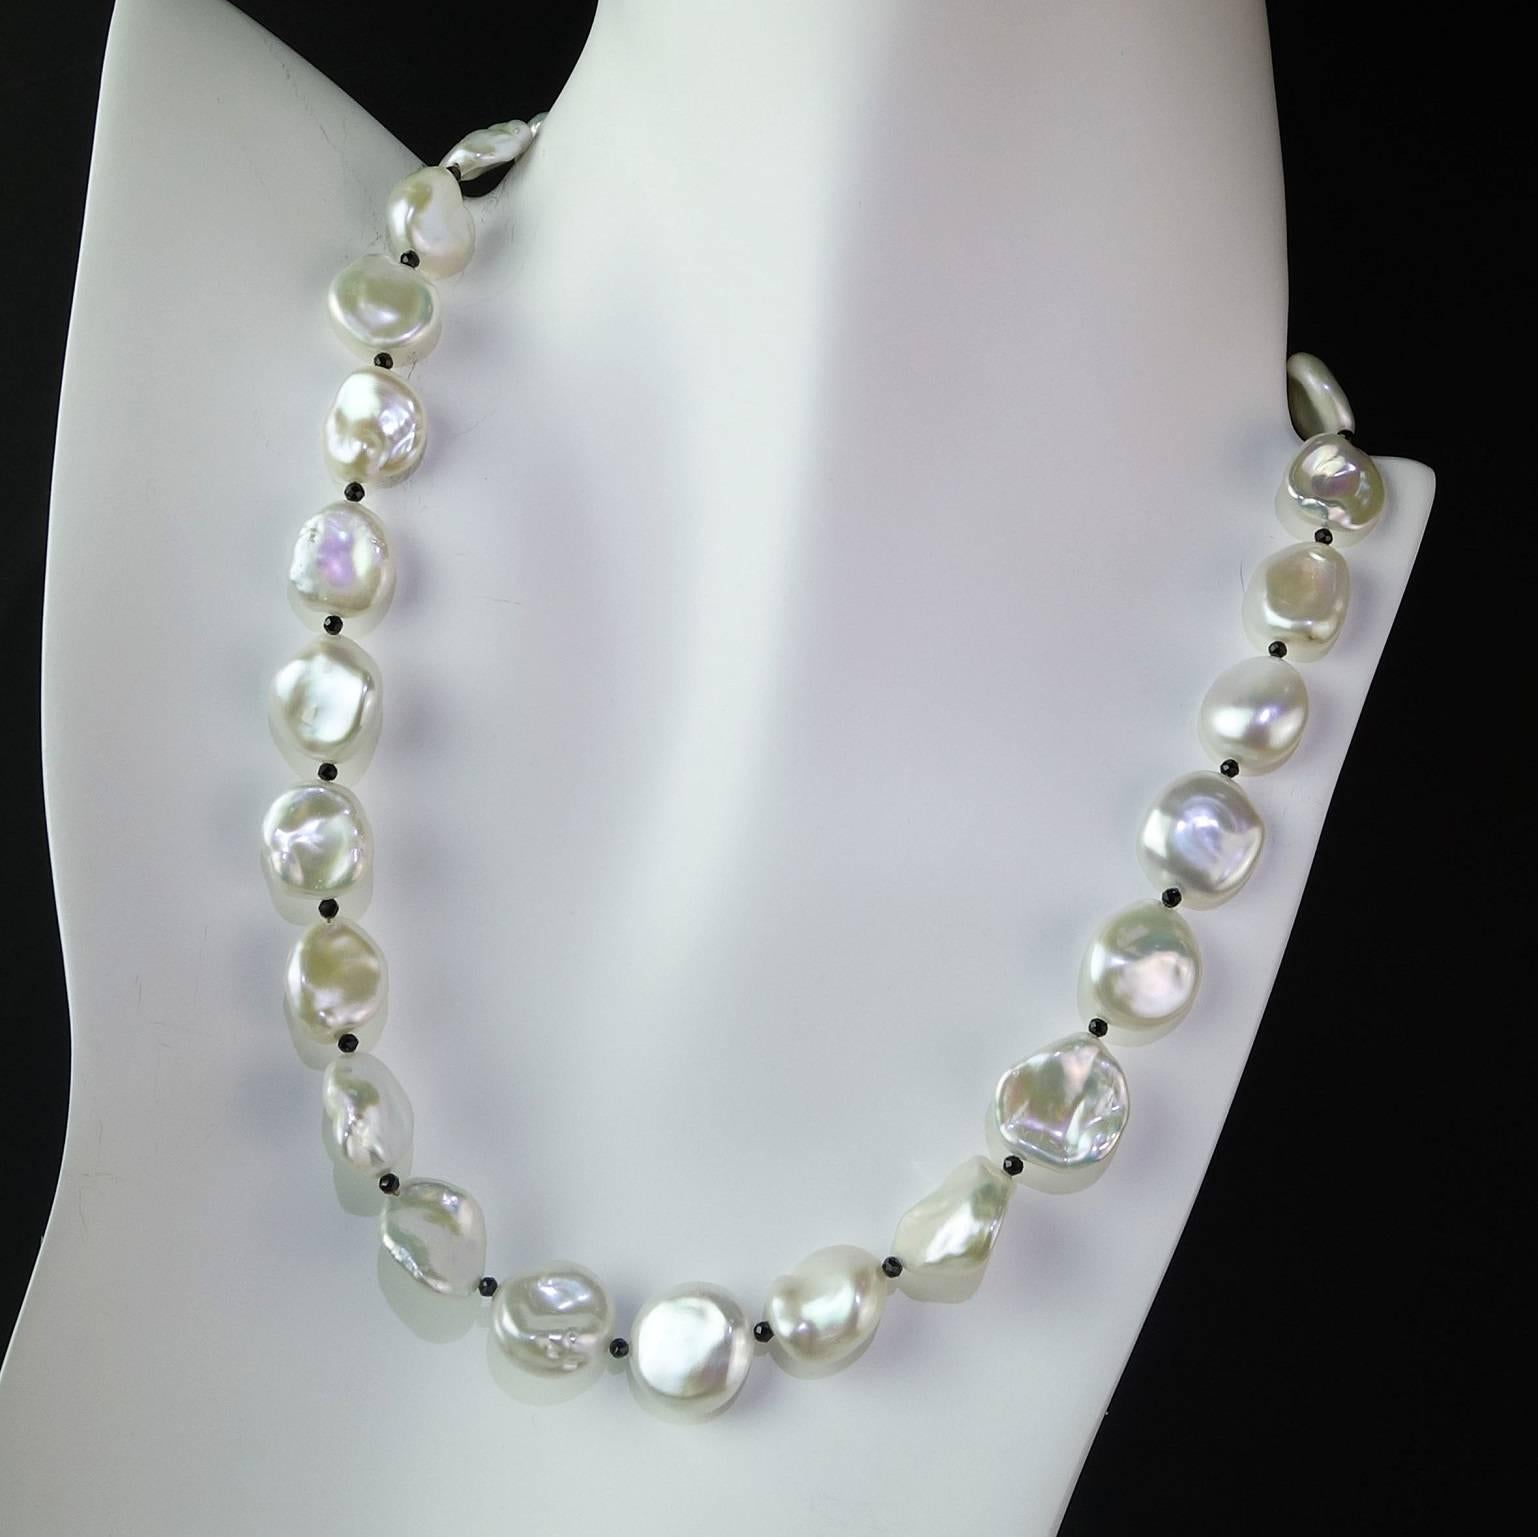 White Iridescent Freshwater Pearls with Black Spinel Accents Necklace 2